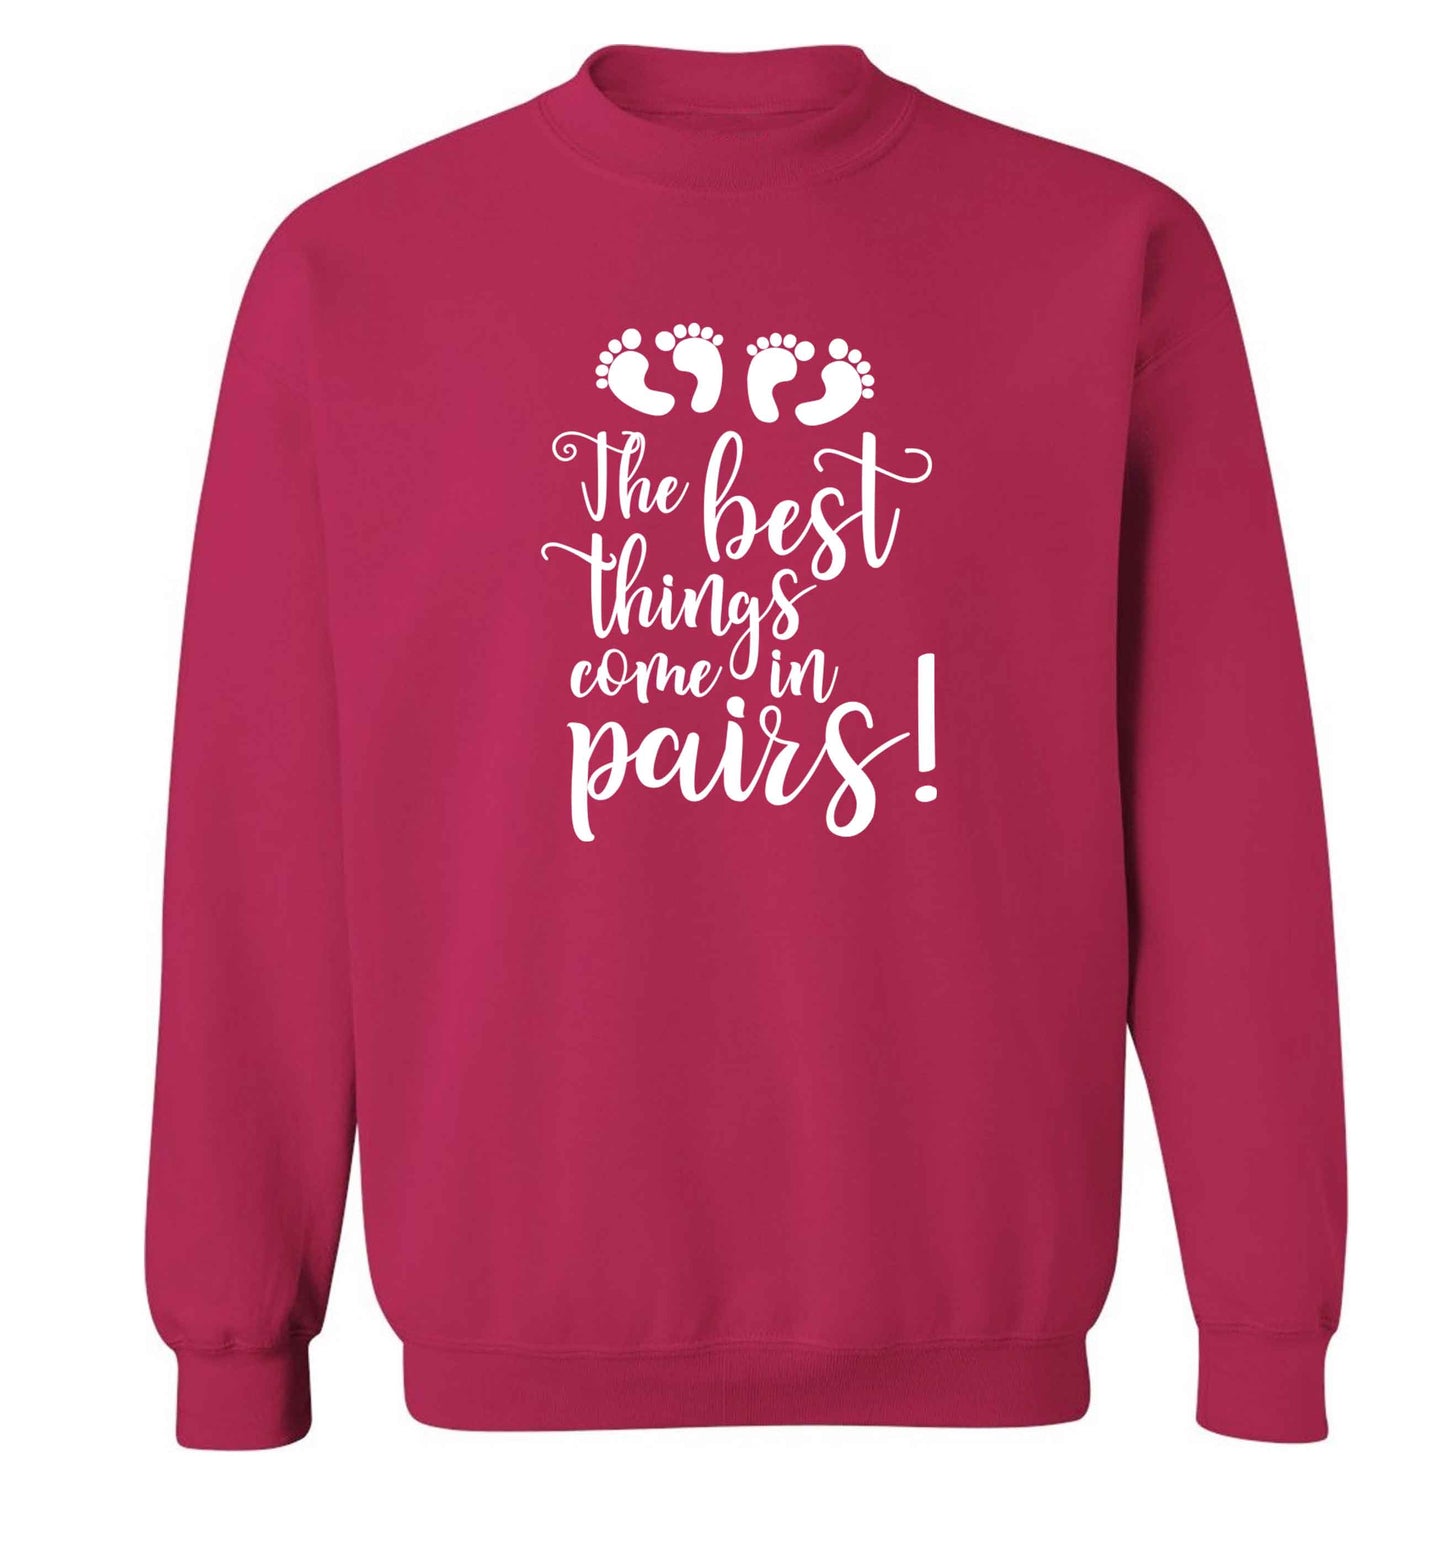 The best things come in pairs! adult's unisex pink sweater 2XL